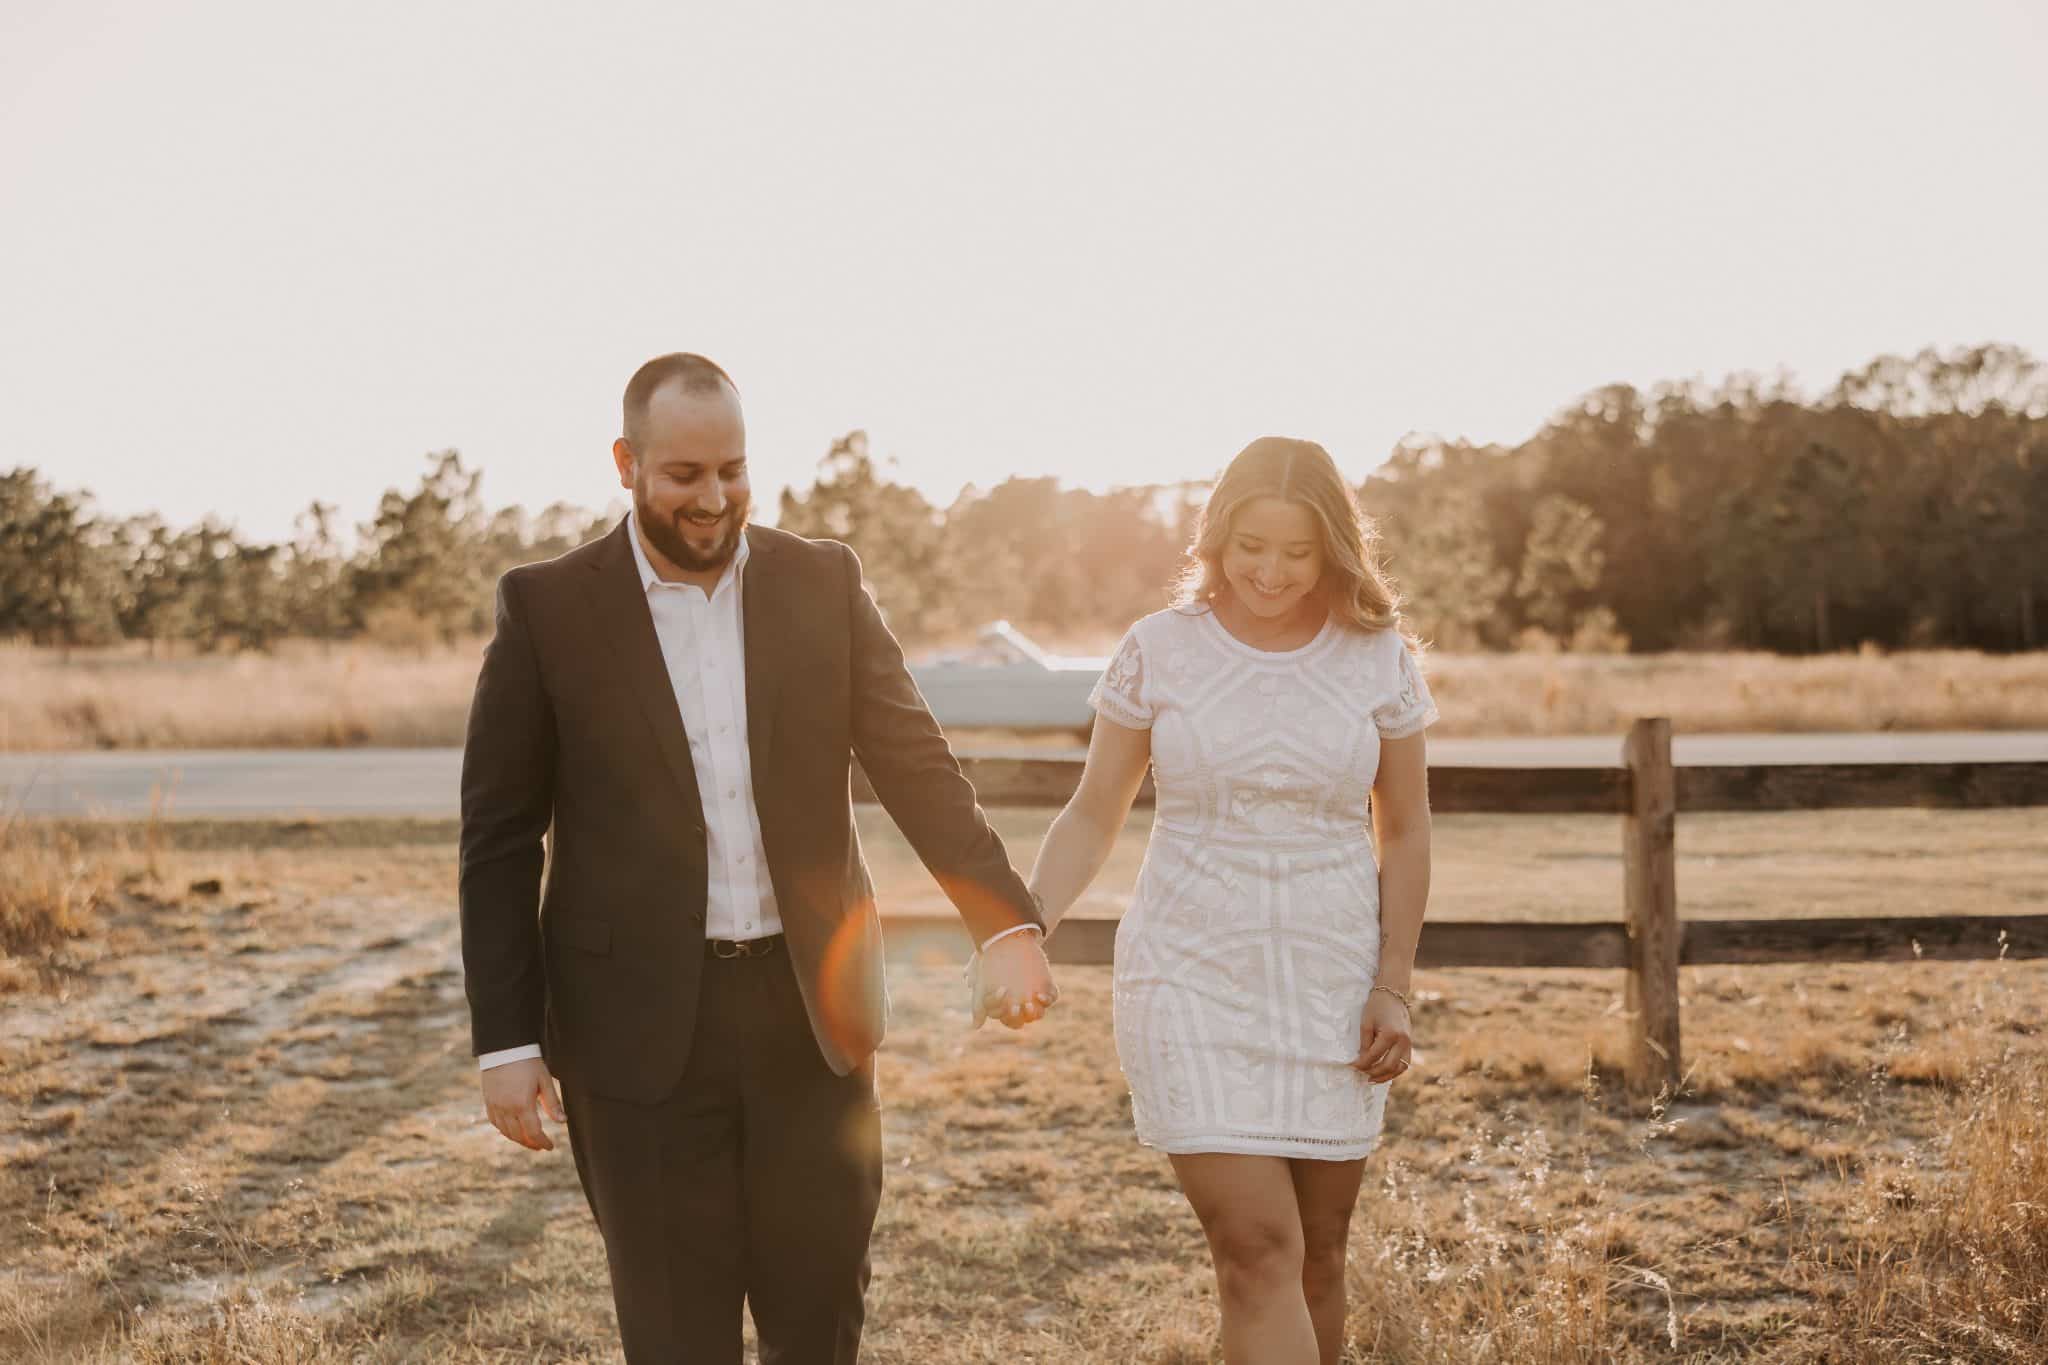 Couple walks hand in hand through a field smiling